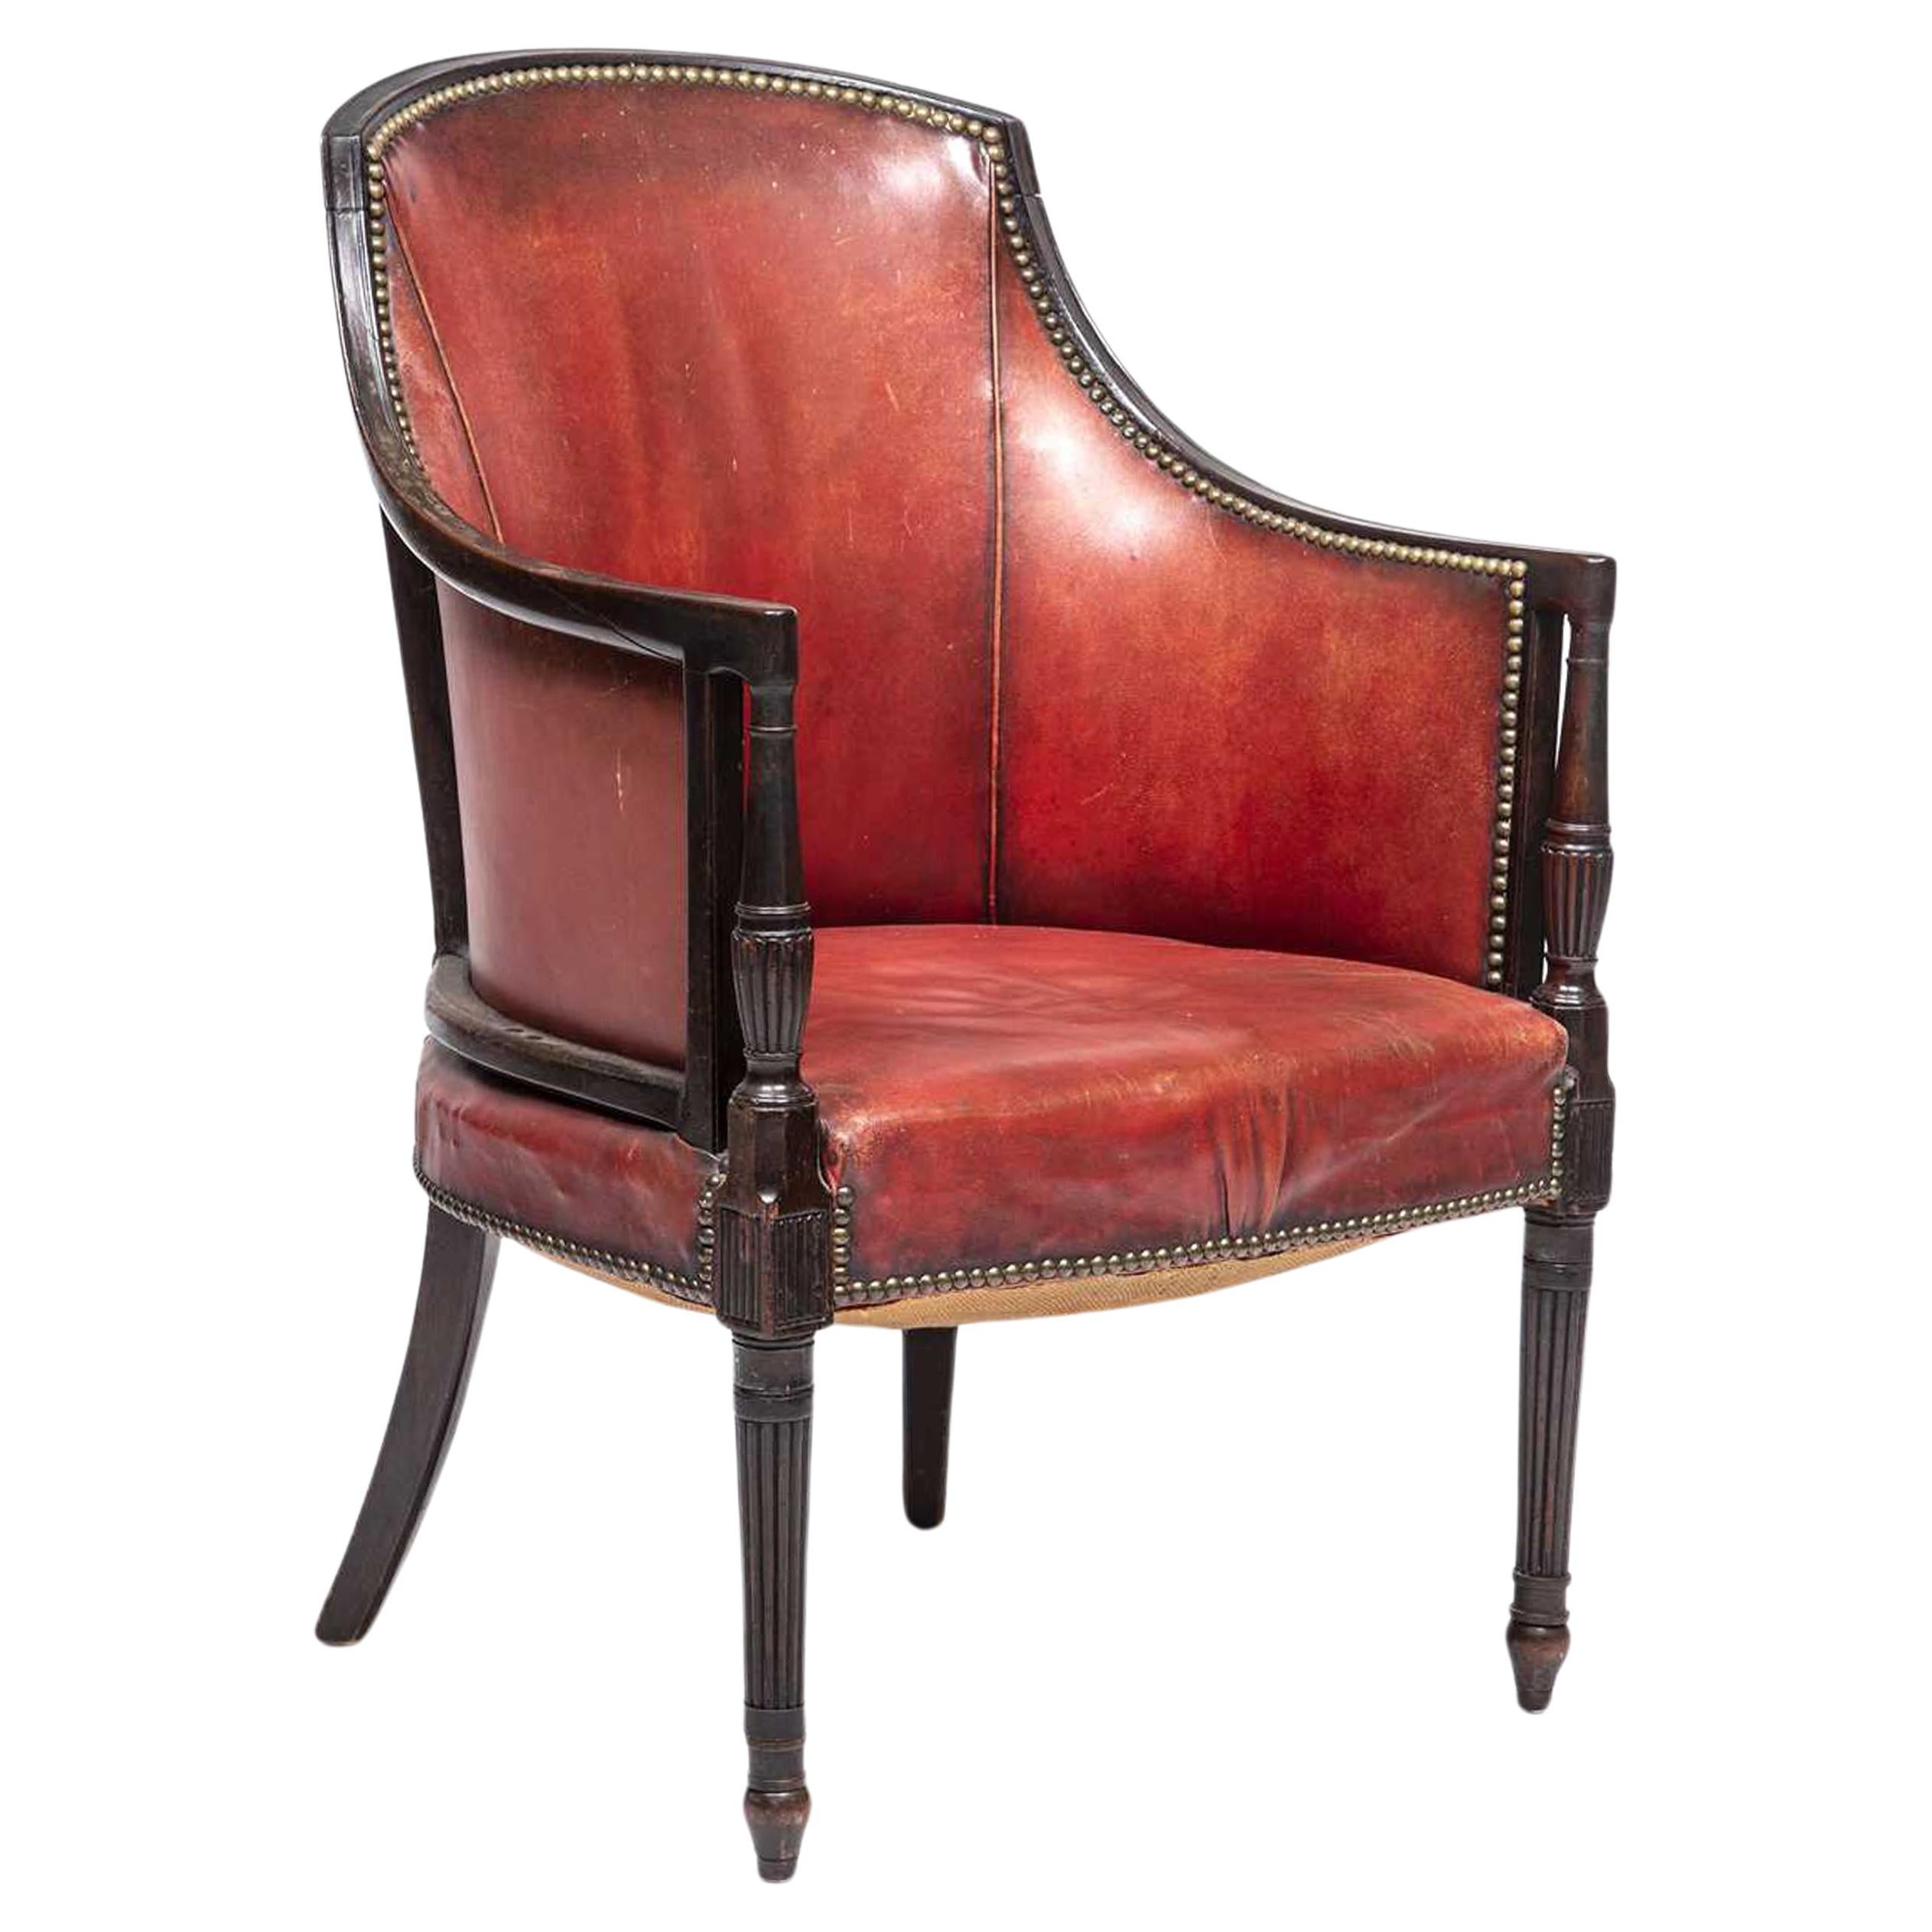 From The Oxford Library 19th Century Library Tub Chair Red Leather & Brass Studs